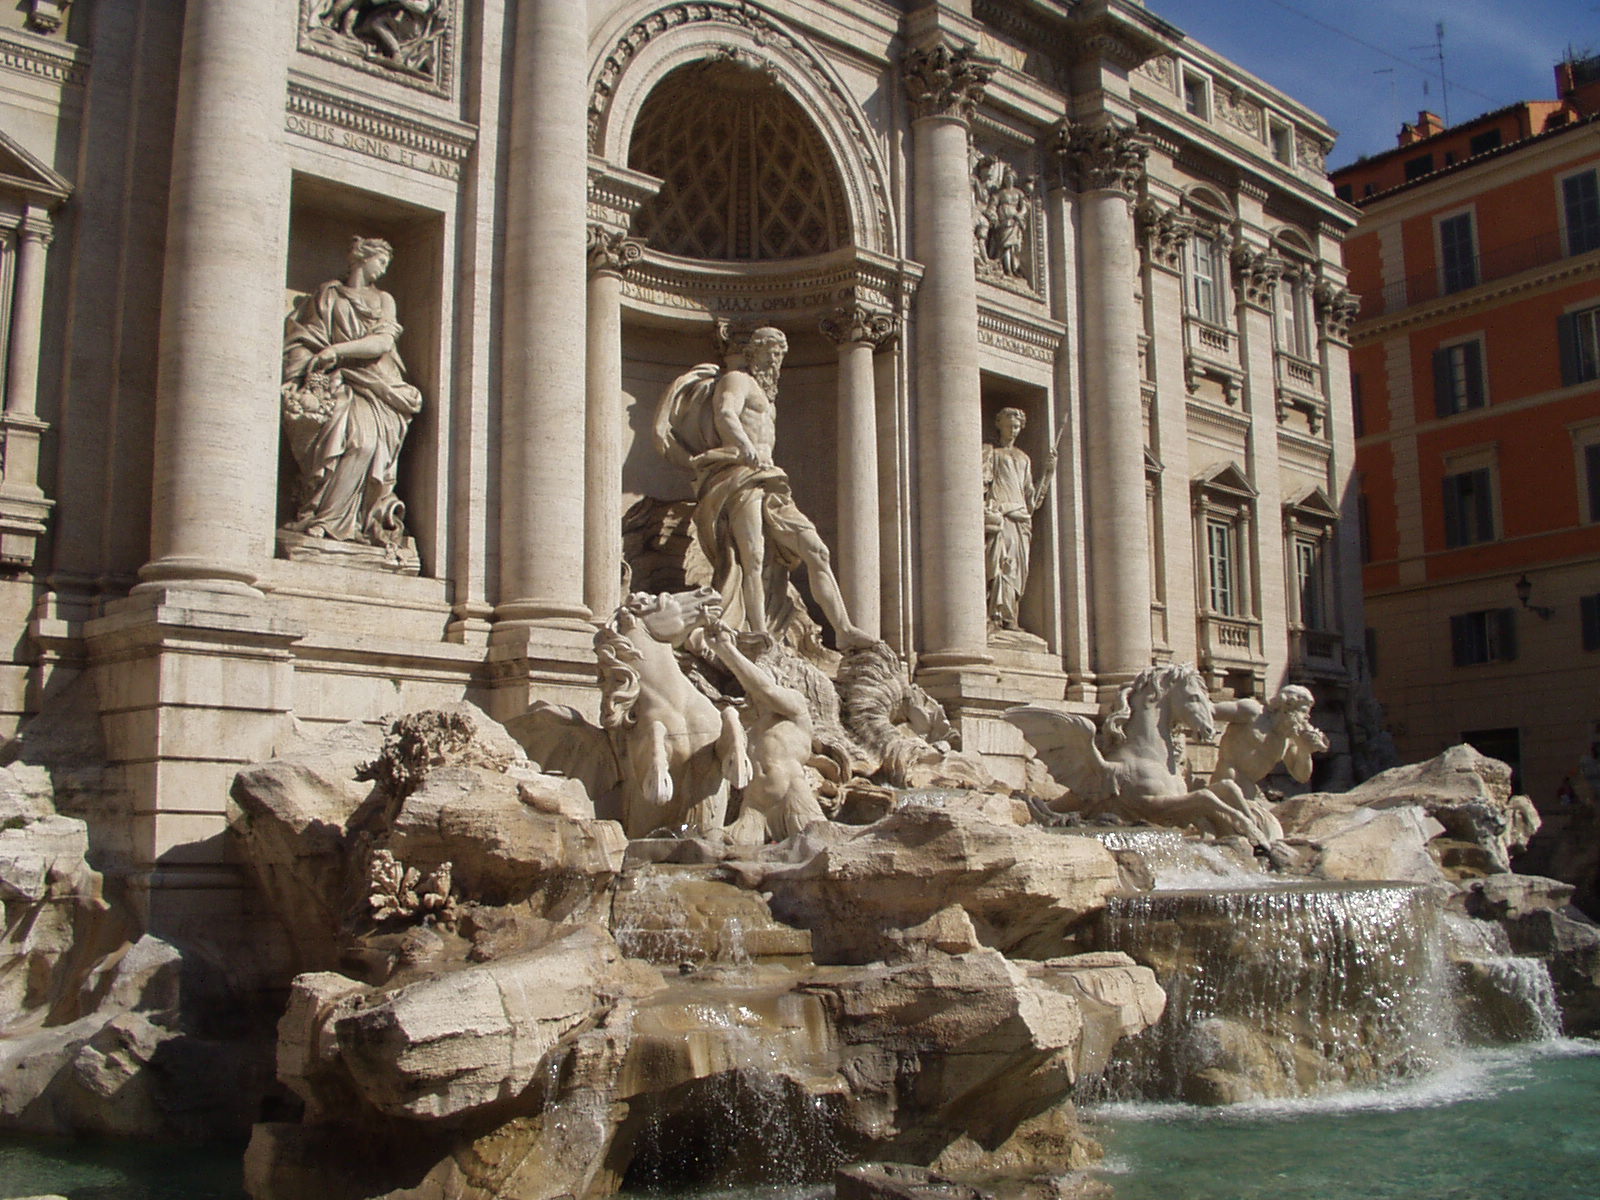 The Trevi Fountain in Rome, Italy. (credit: Jay Lloyd)